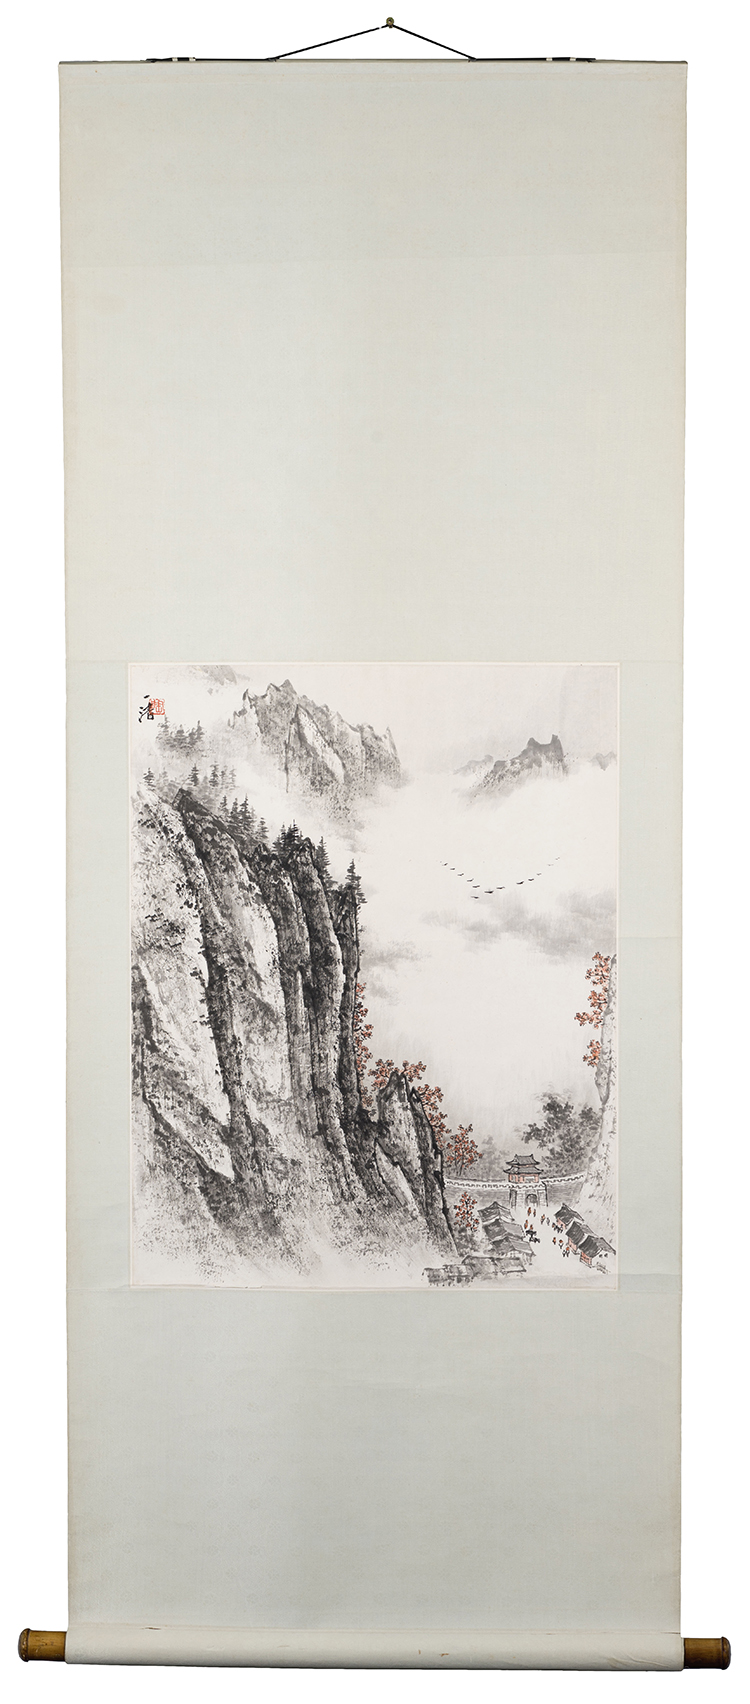 Autumn Mountains by Tao Yiqing